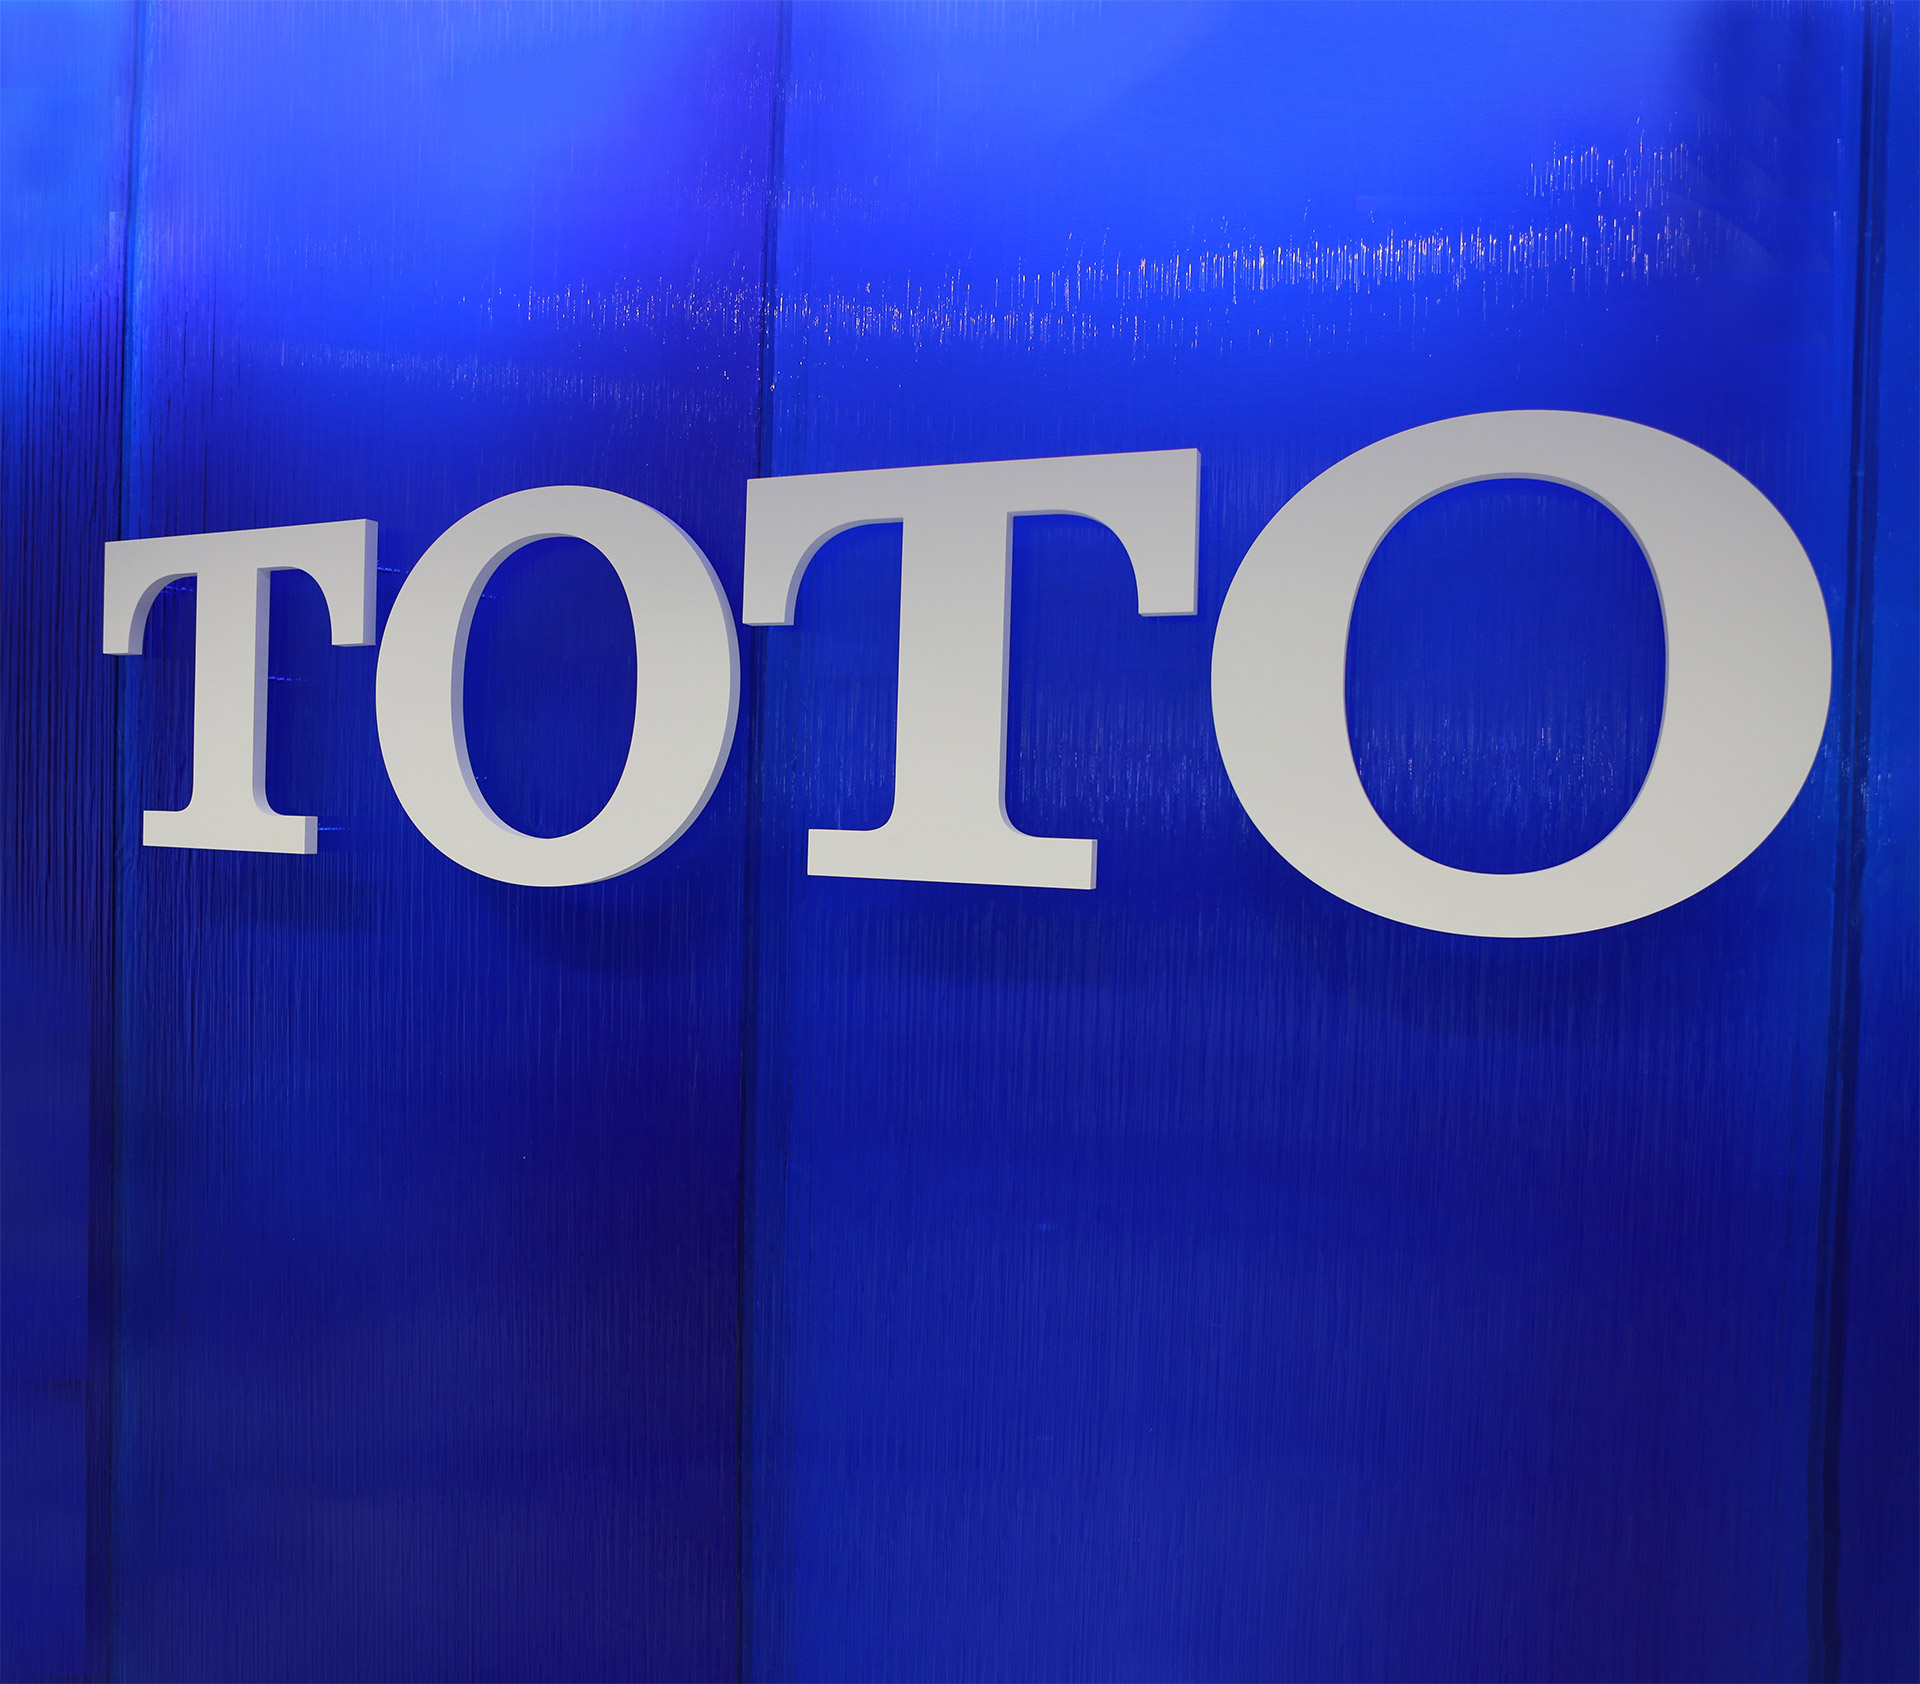 TOTO signage on blue textured glass